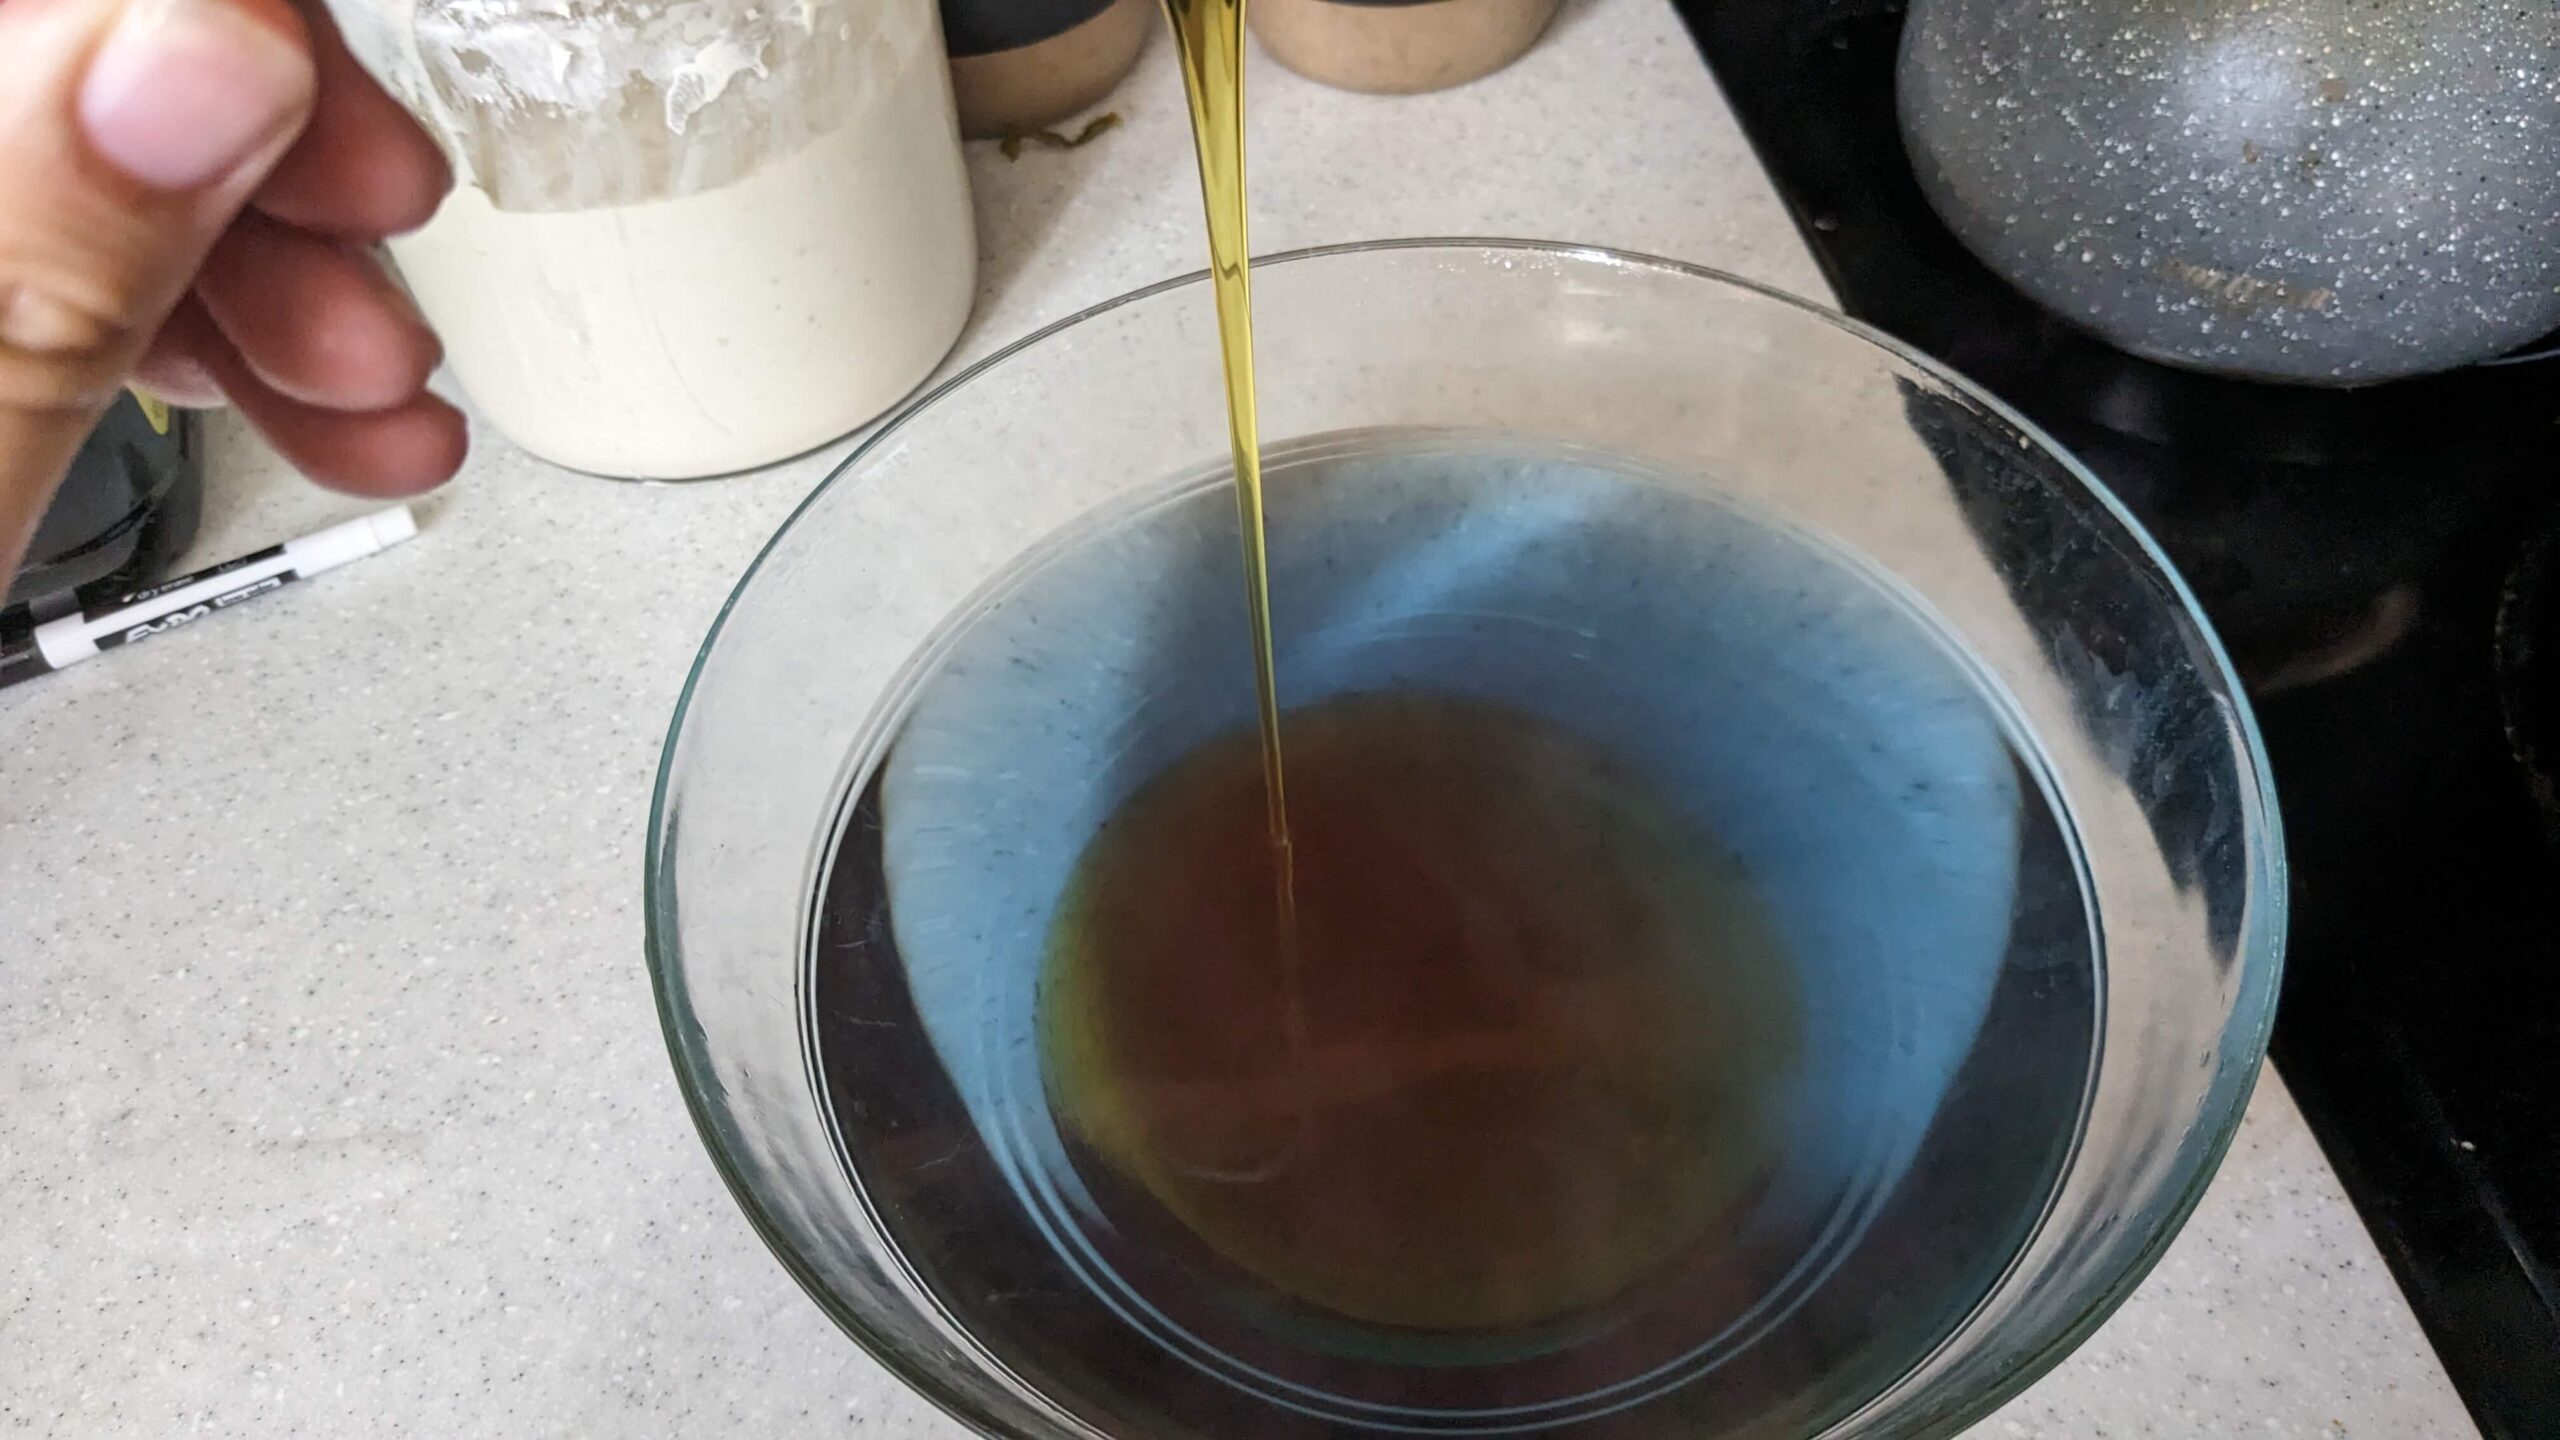 honey pouring into a bowl of blue liquid that is turning amber